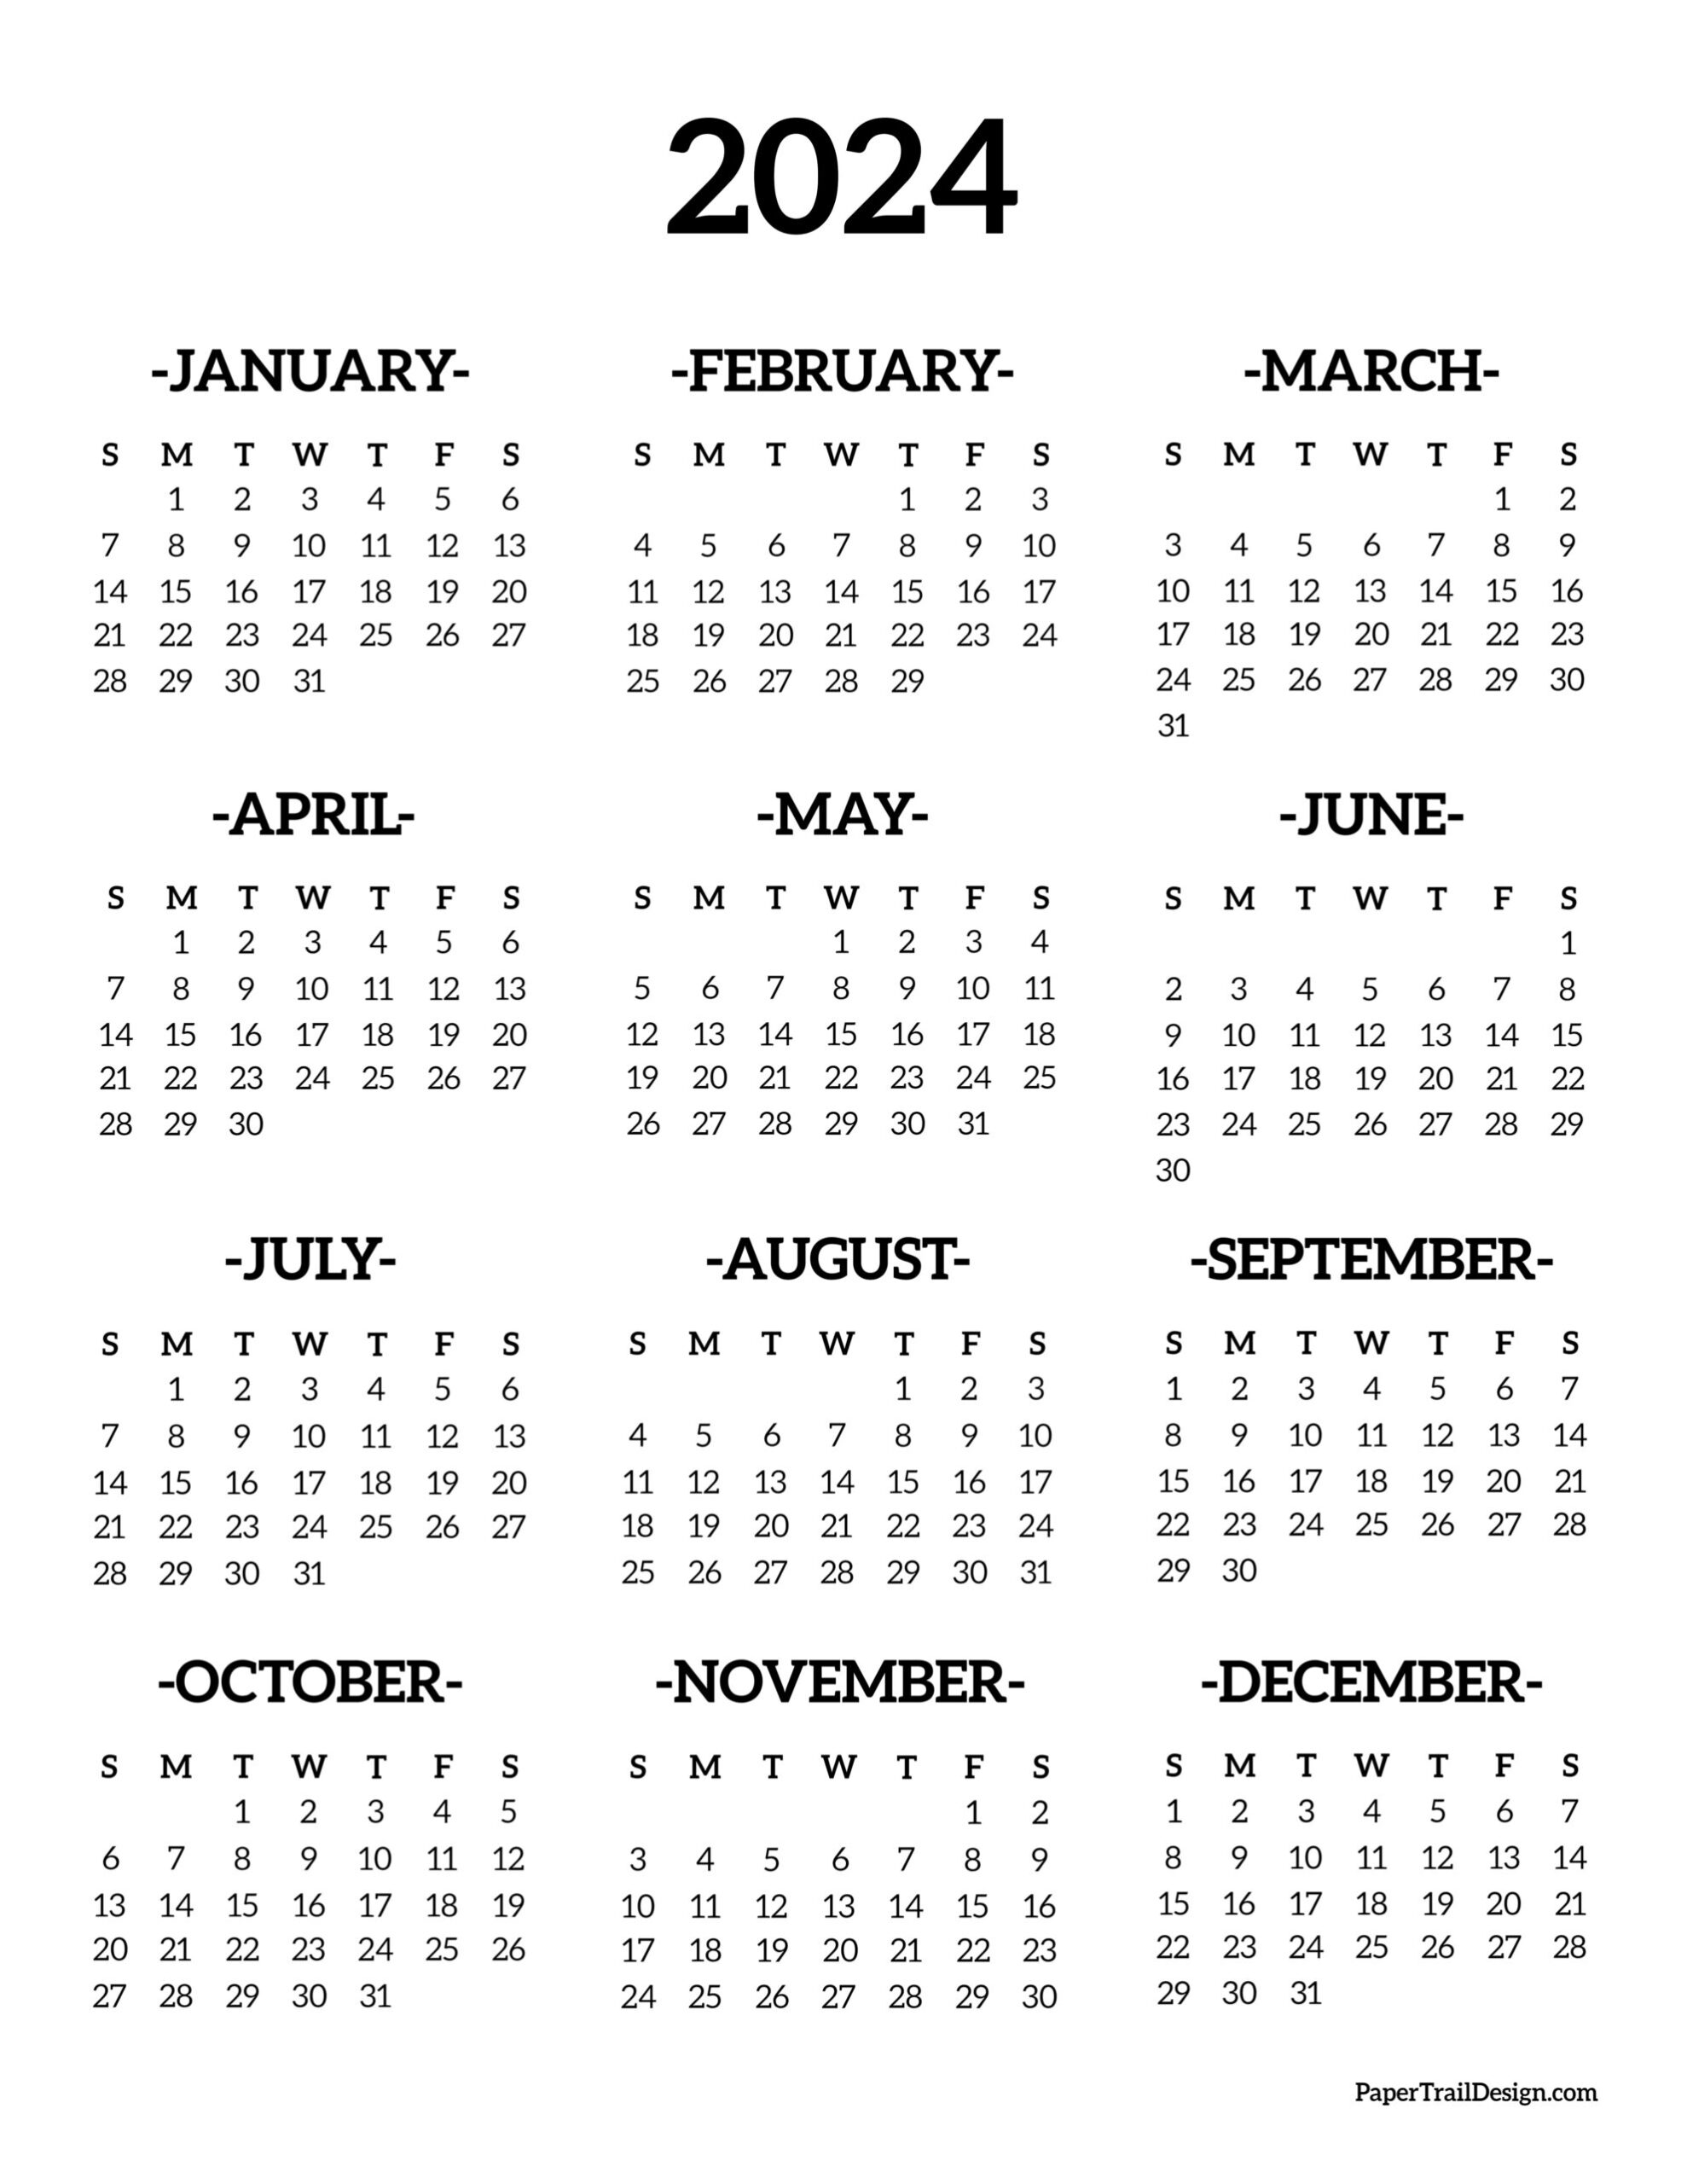 Calendar 2024 Printable One Page - Paper Trail Design for 2024 Printable Wall Calendar